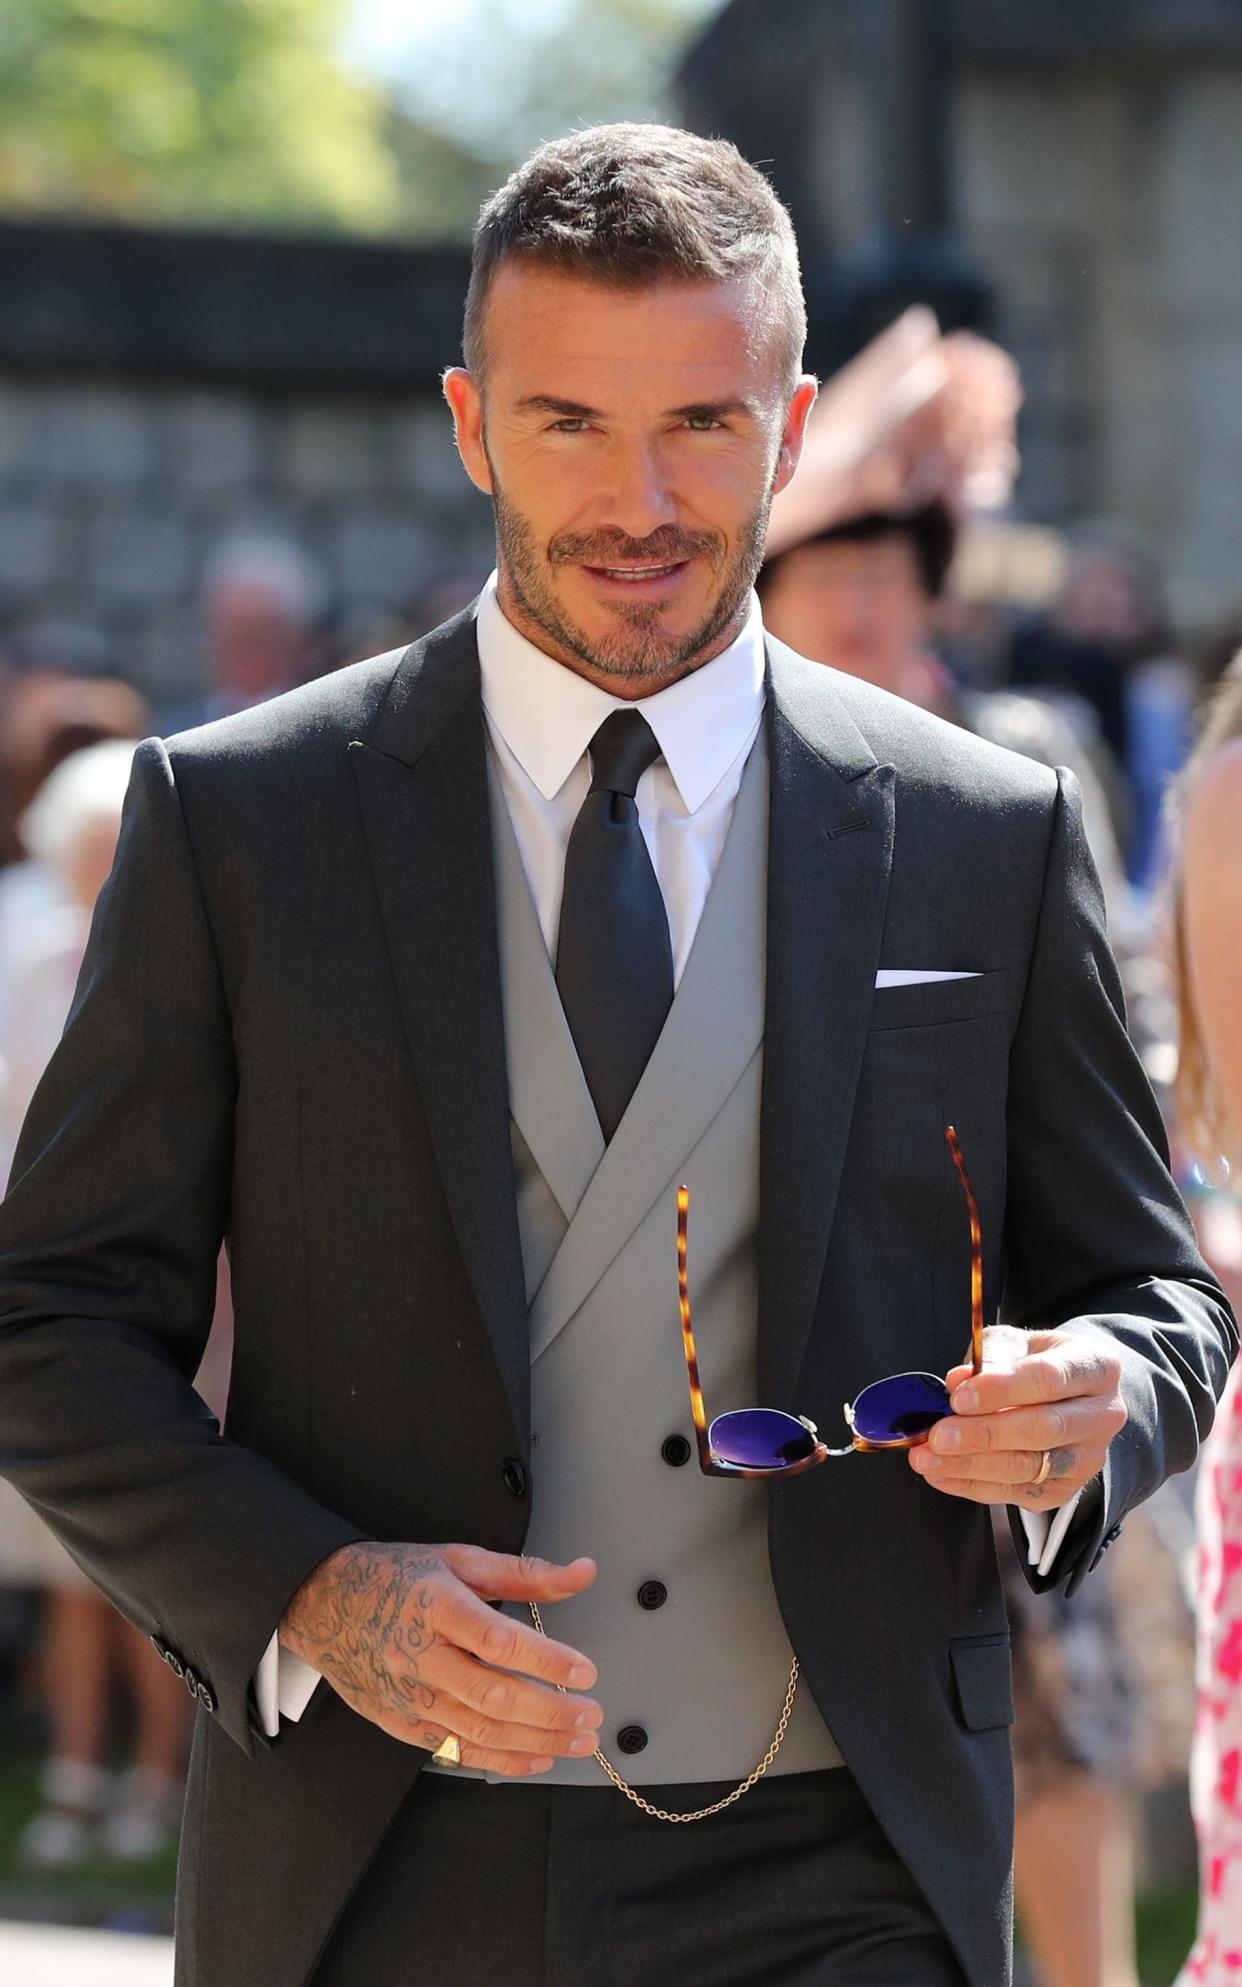 David Beckham in Dior Man, attending the wedding of Prince Harry and Meghan Markle in May - PA